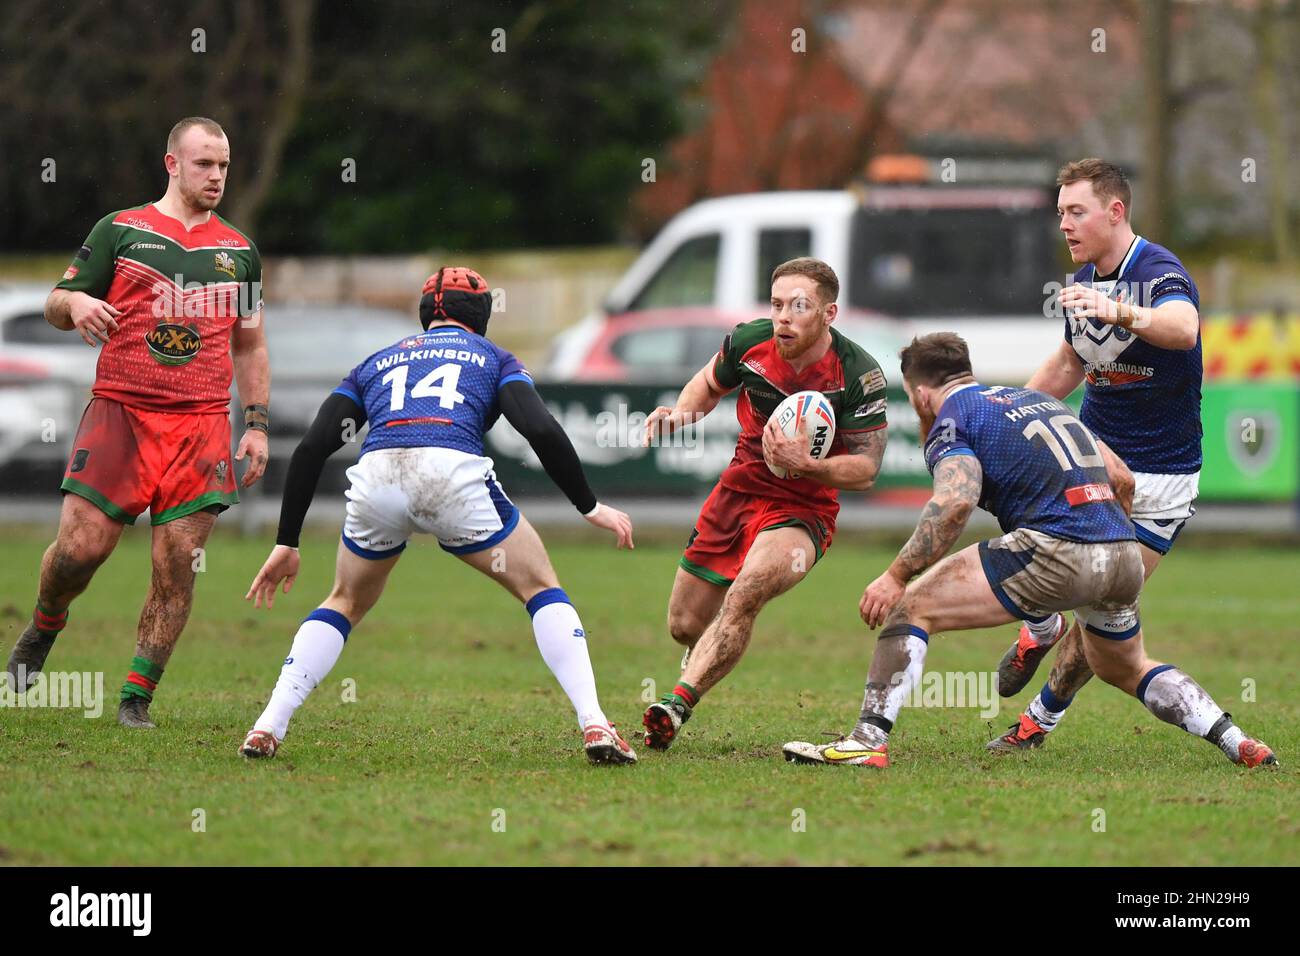 Sale, UK. 13th Feb, 2022. Pat Rainford of North Wales Crusaders in action during the game Credit: News Images /Alamy Live News Stock Photo